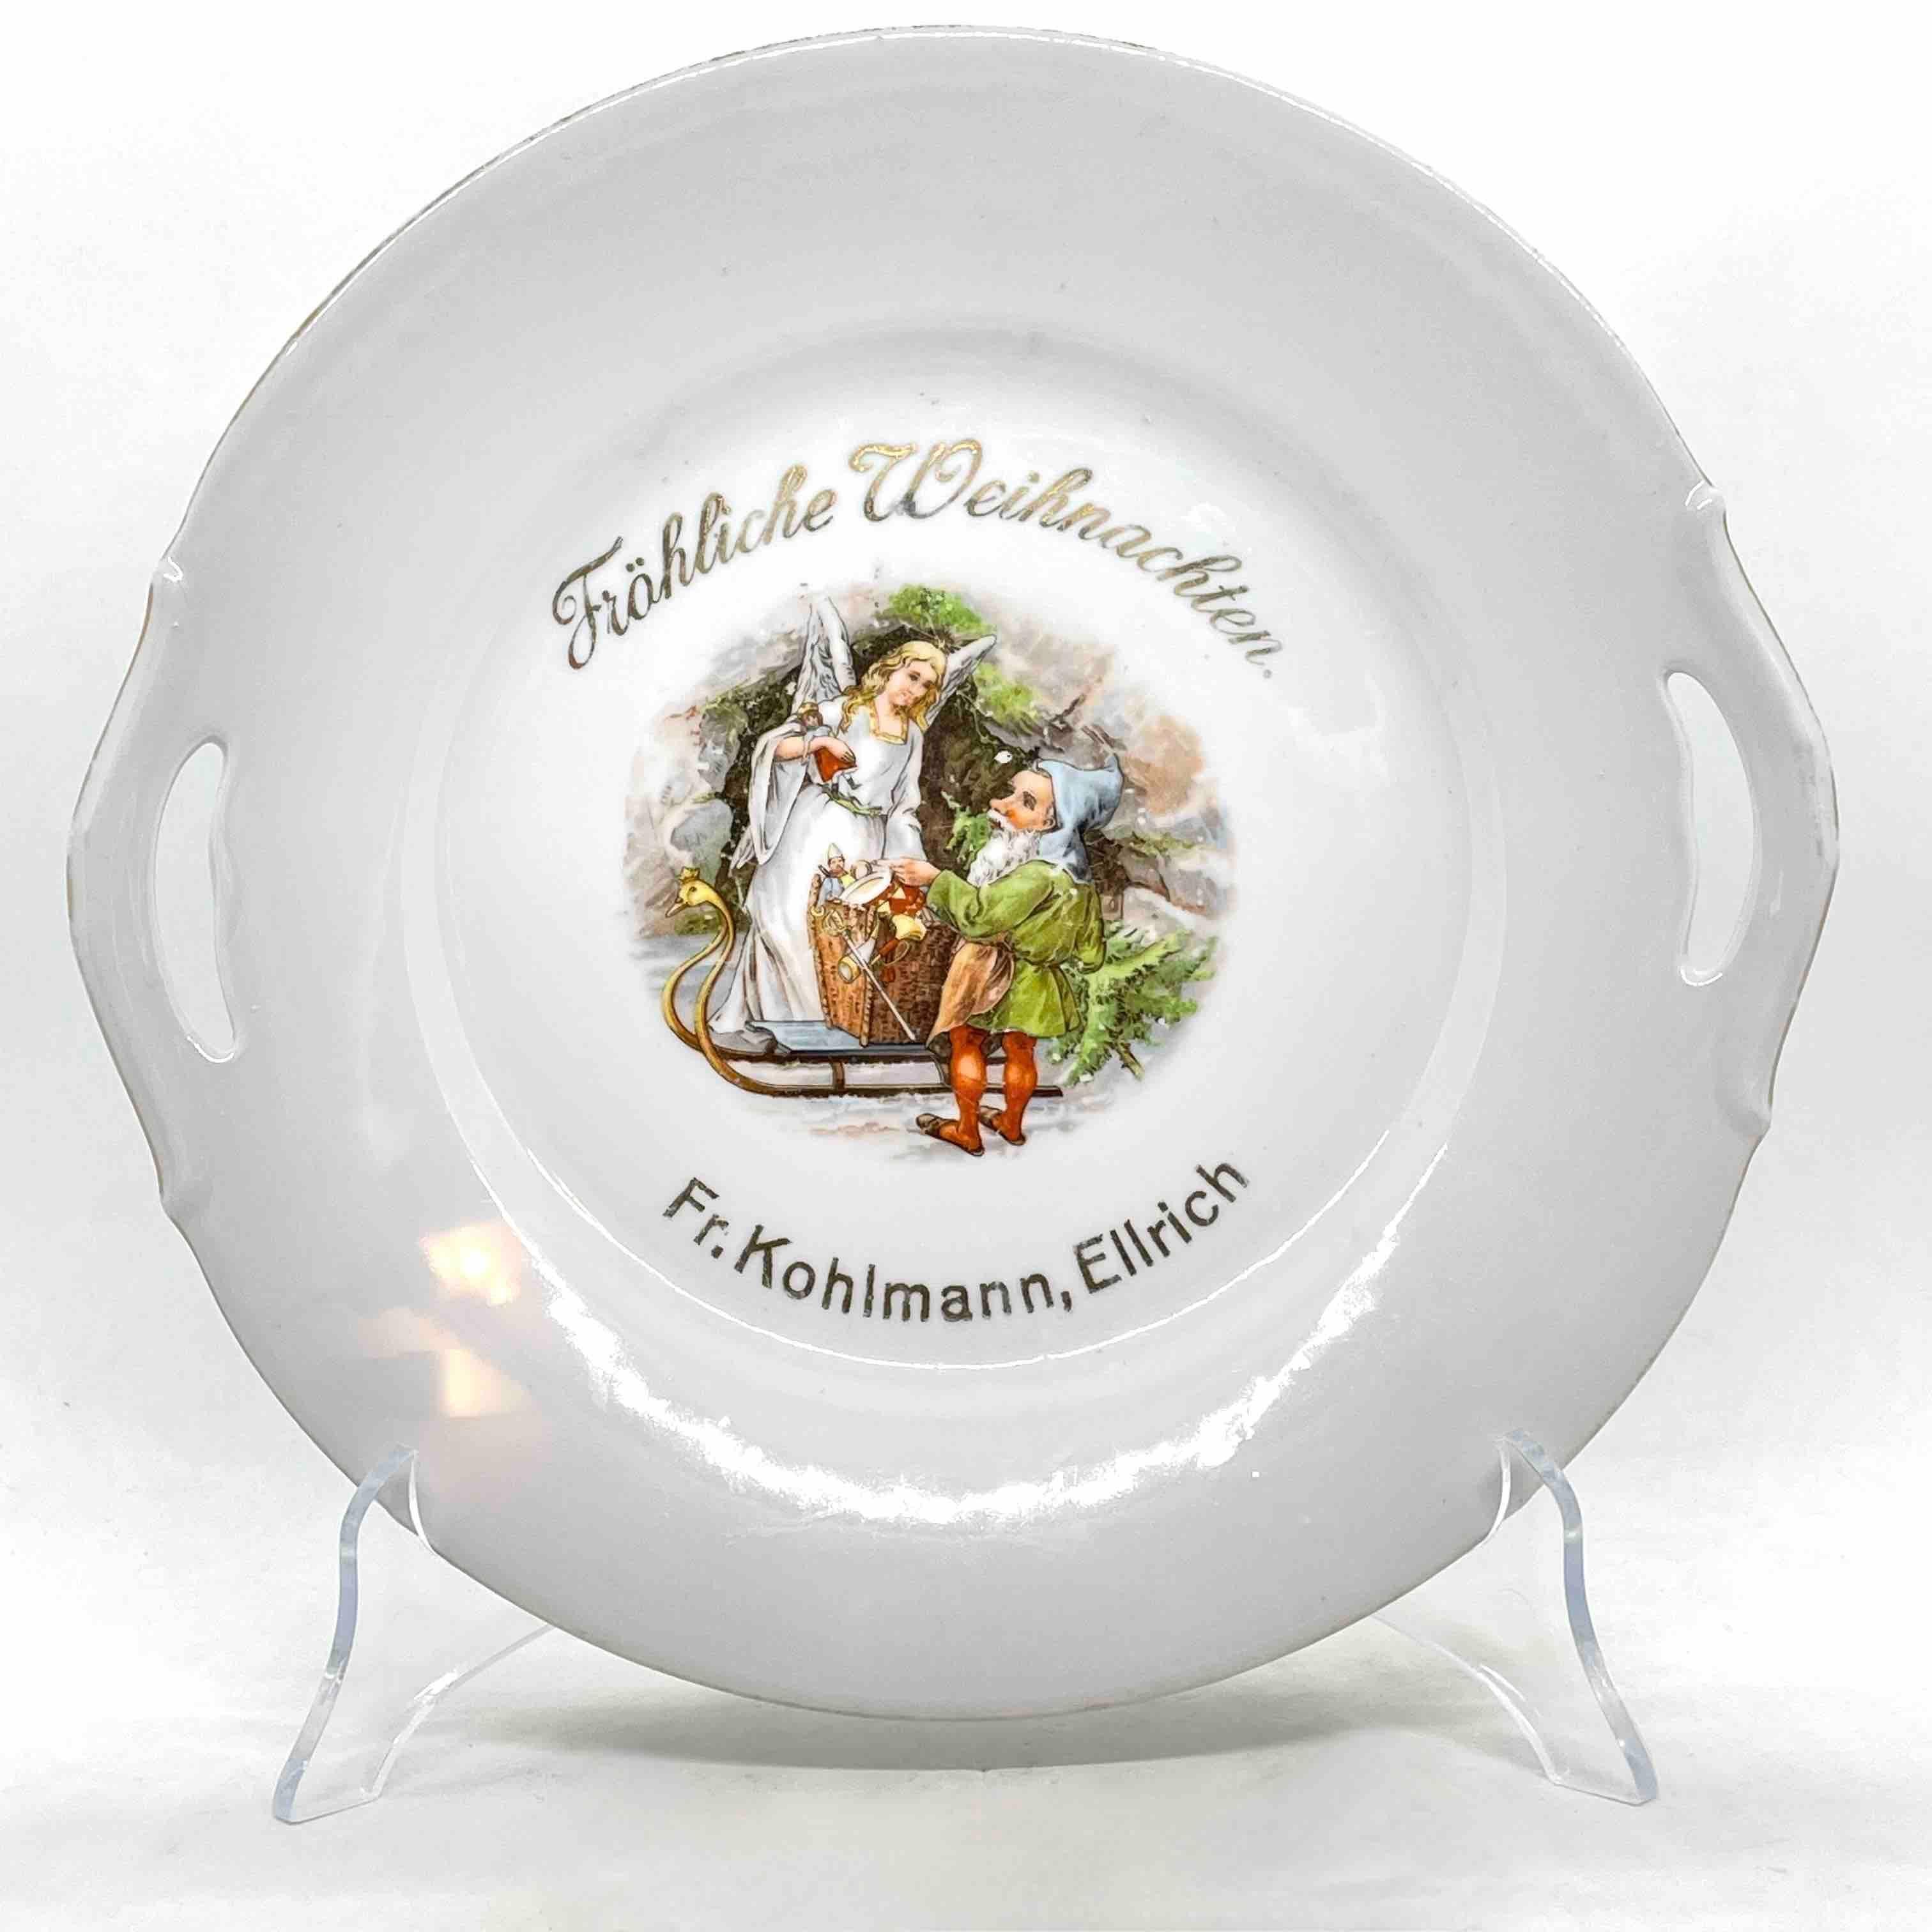 This beautiful Christmas plate is a nice addition to your Decoration for Santa Claus eve. It is marked at the back. Display Santas cookies in a nice way. Santa Claus will be delighted to see his cookies presented in such a stylish way and will be